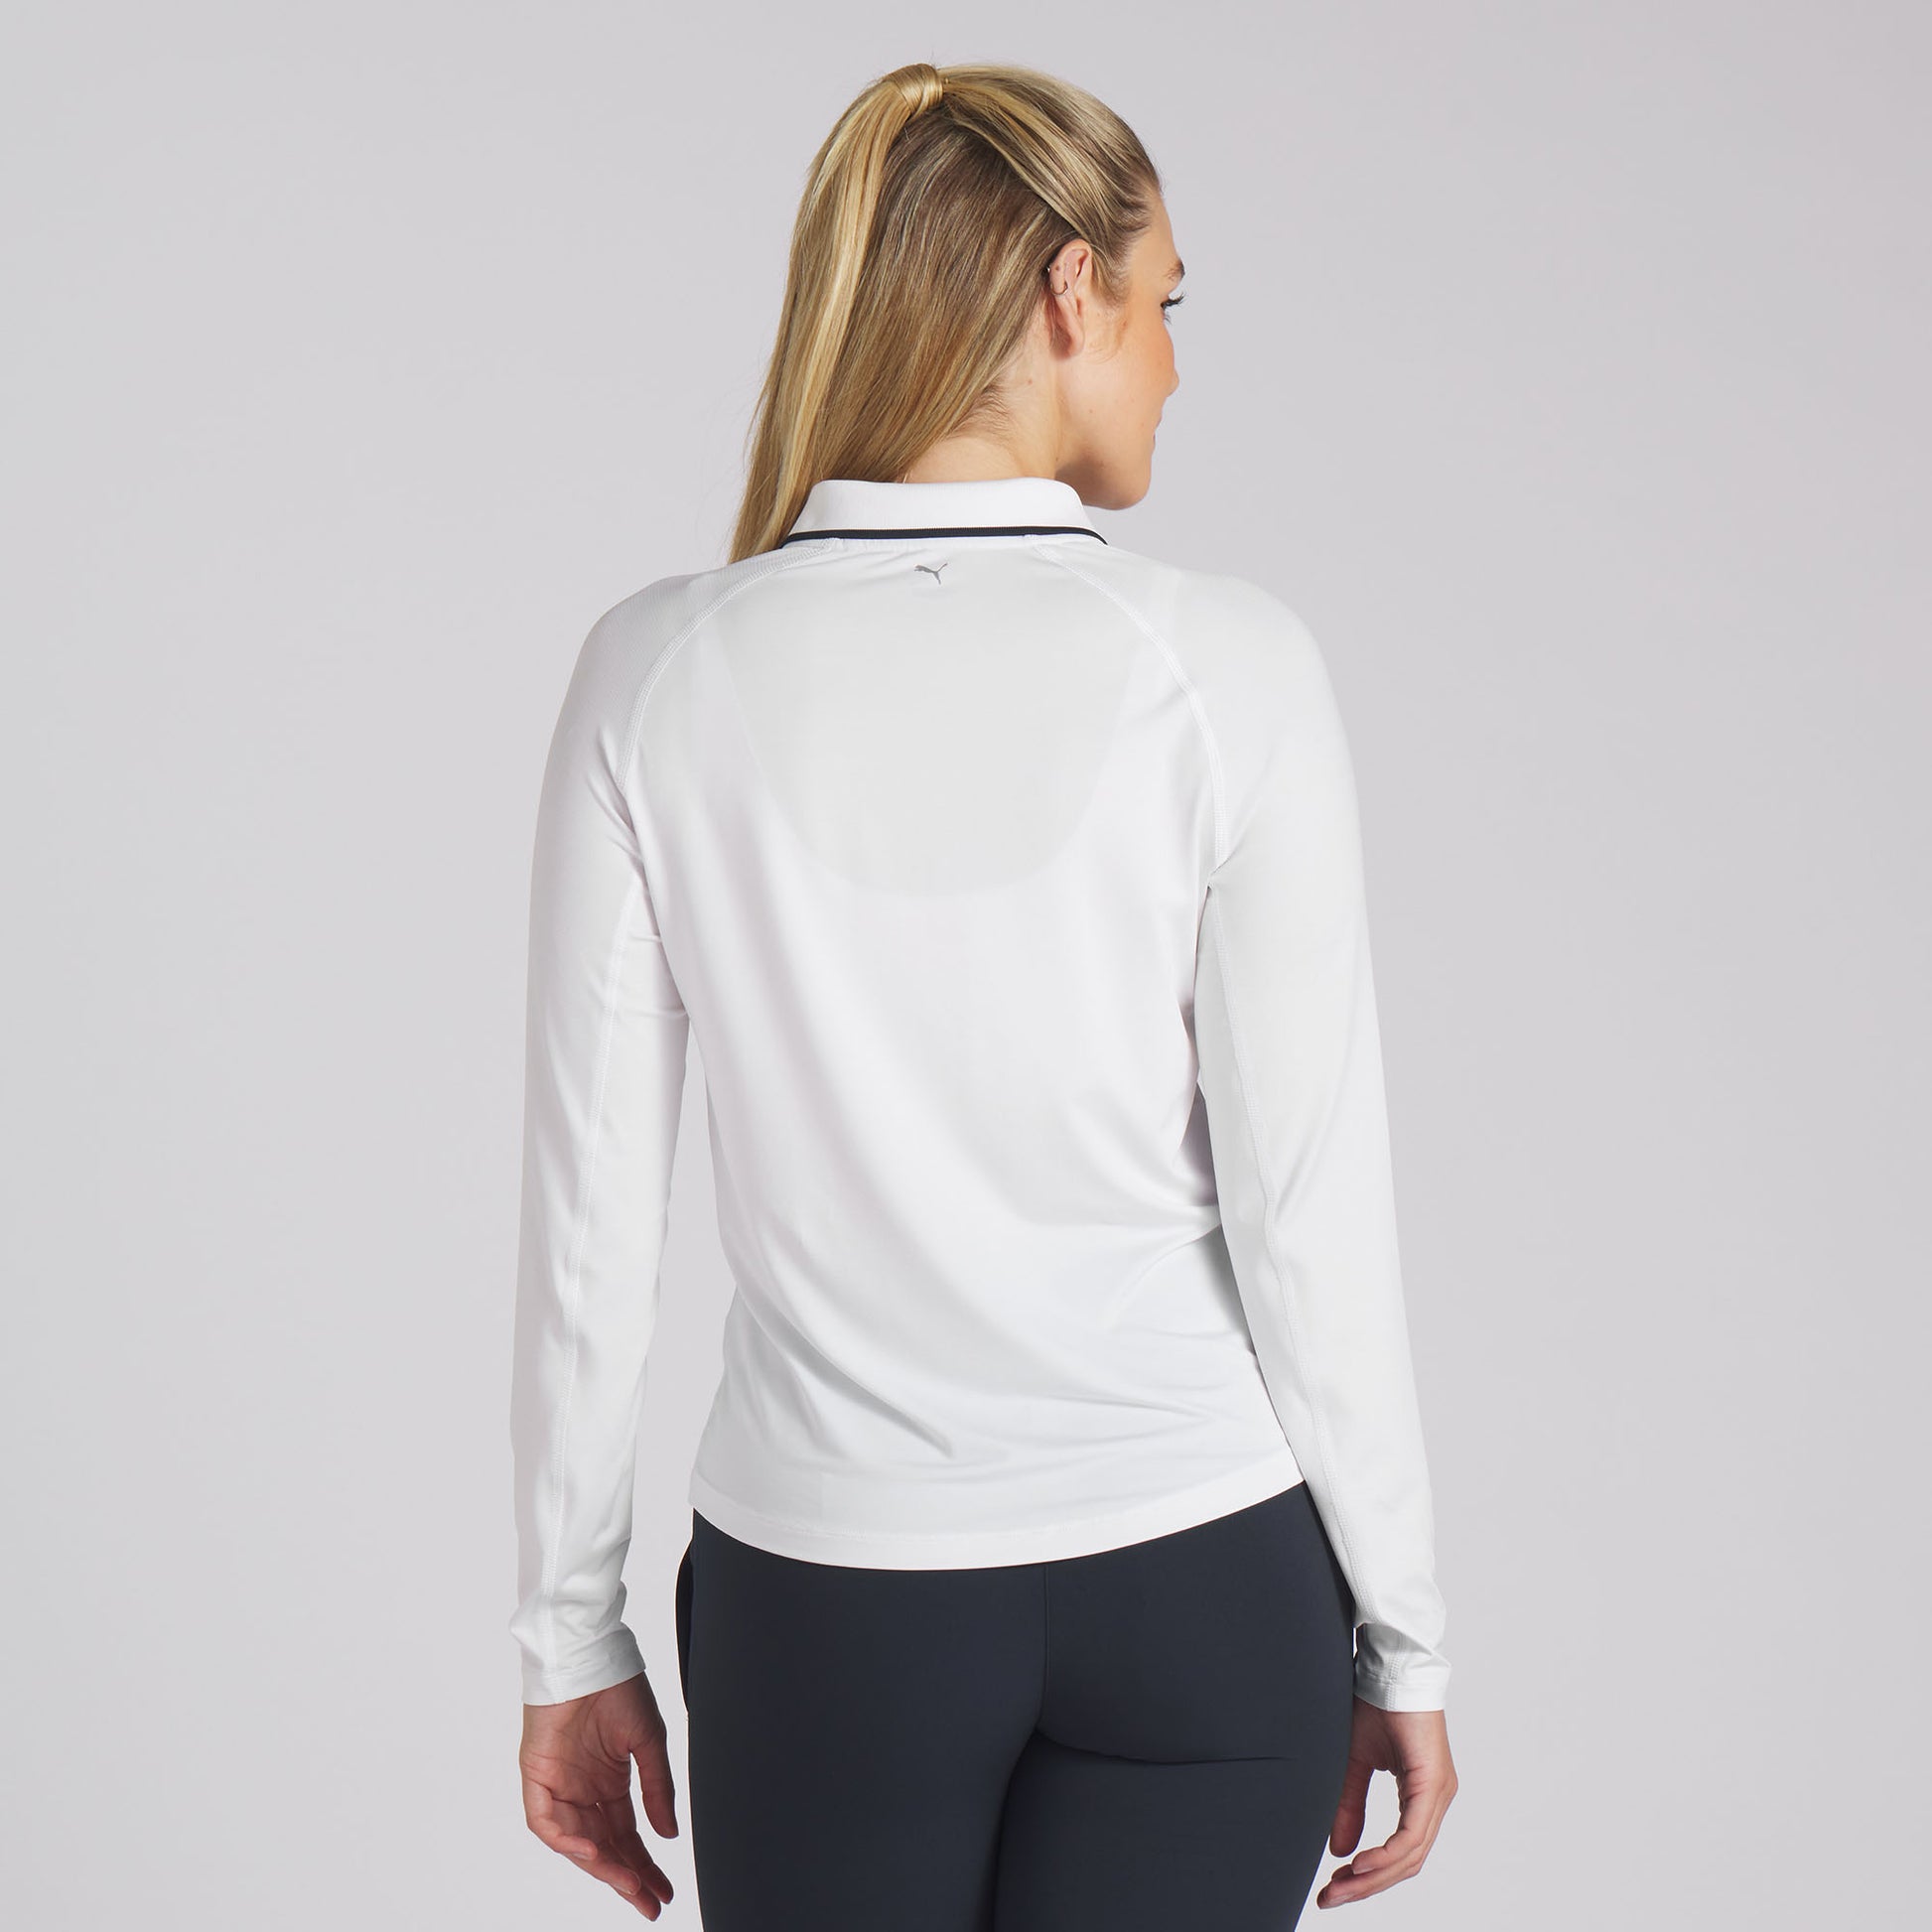 Puma Ladies You-V Long Sleeve Zip-Neck Top in White Glow with UPF 50+